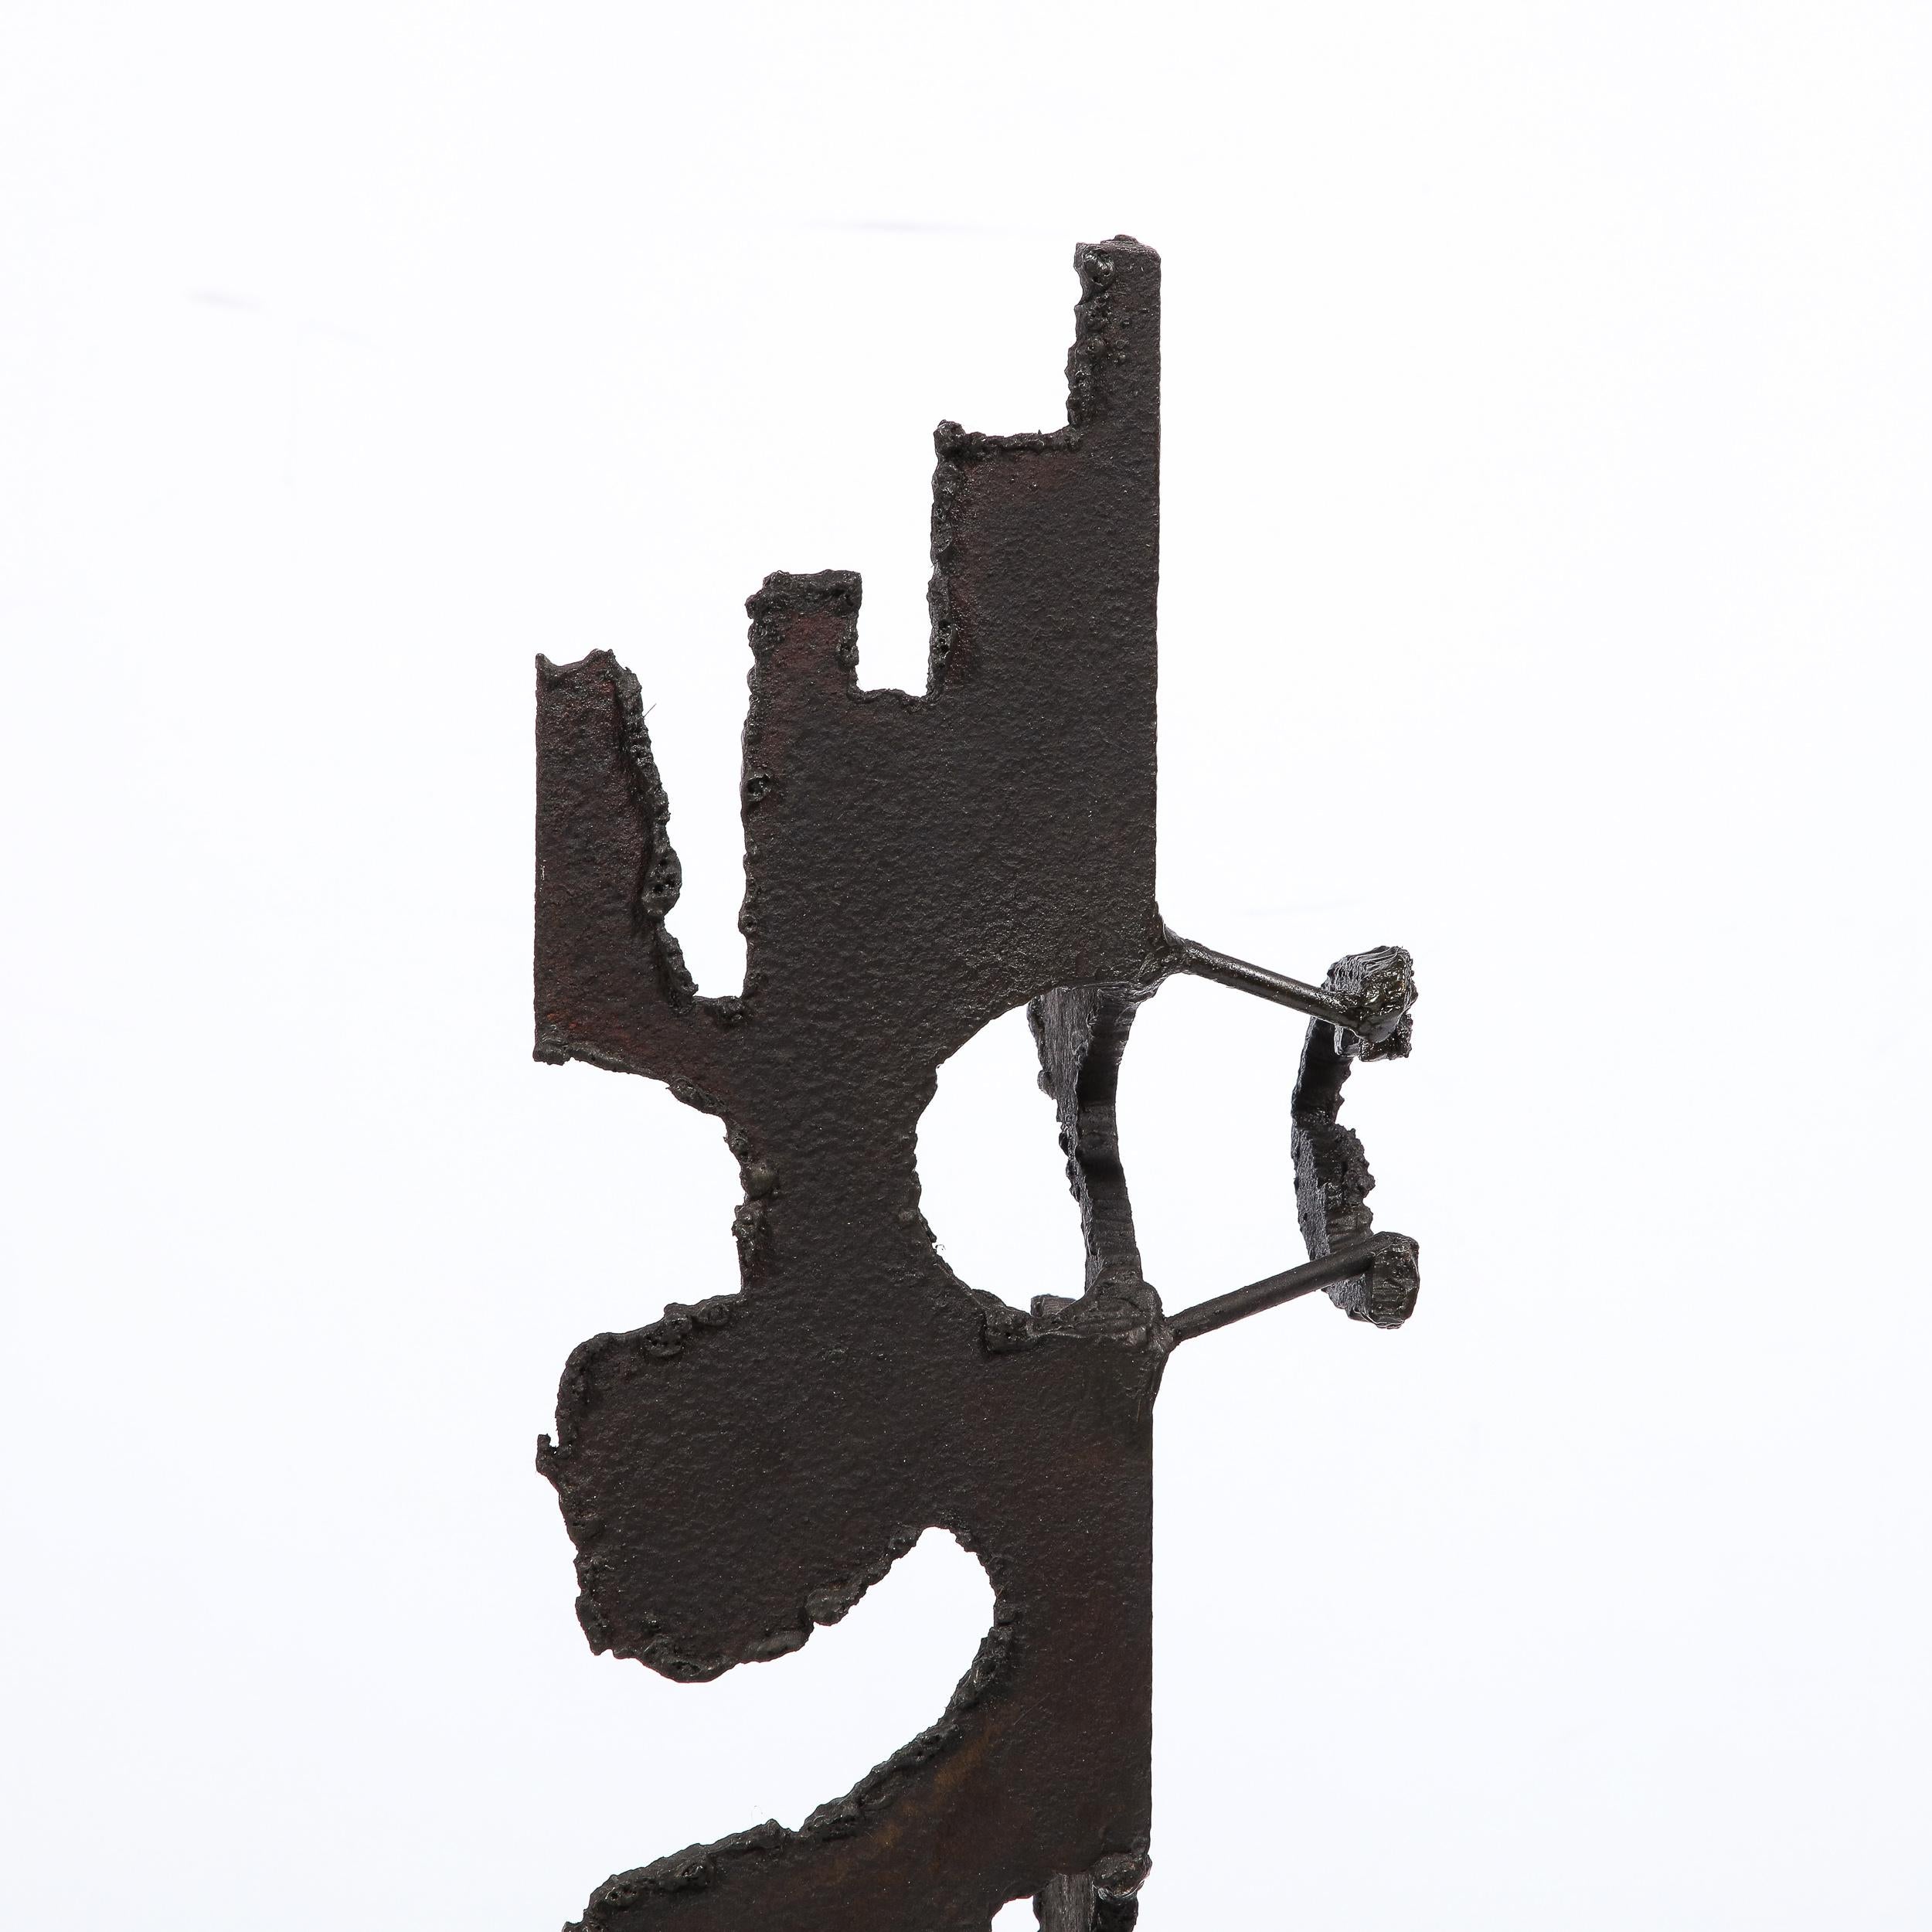 Brutalist Steel Sculpture in Oil and Waxed Finish by Jan Van Deckter For Sale 7